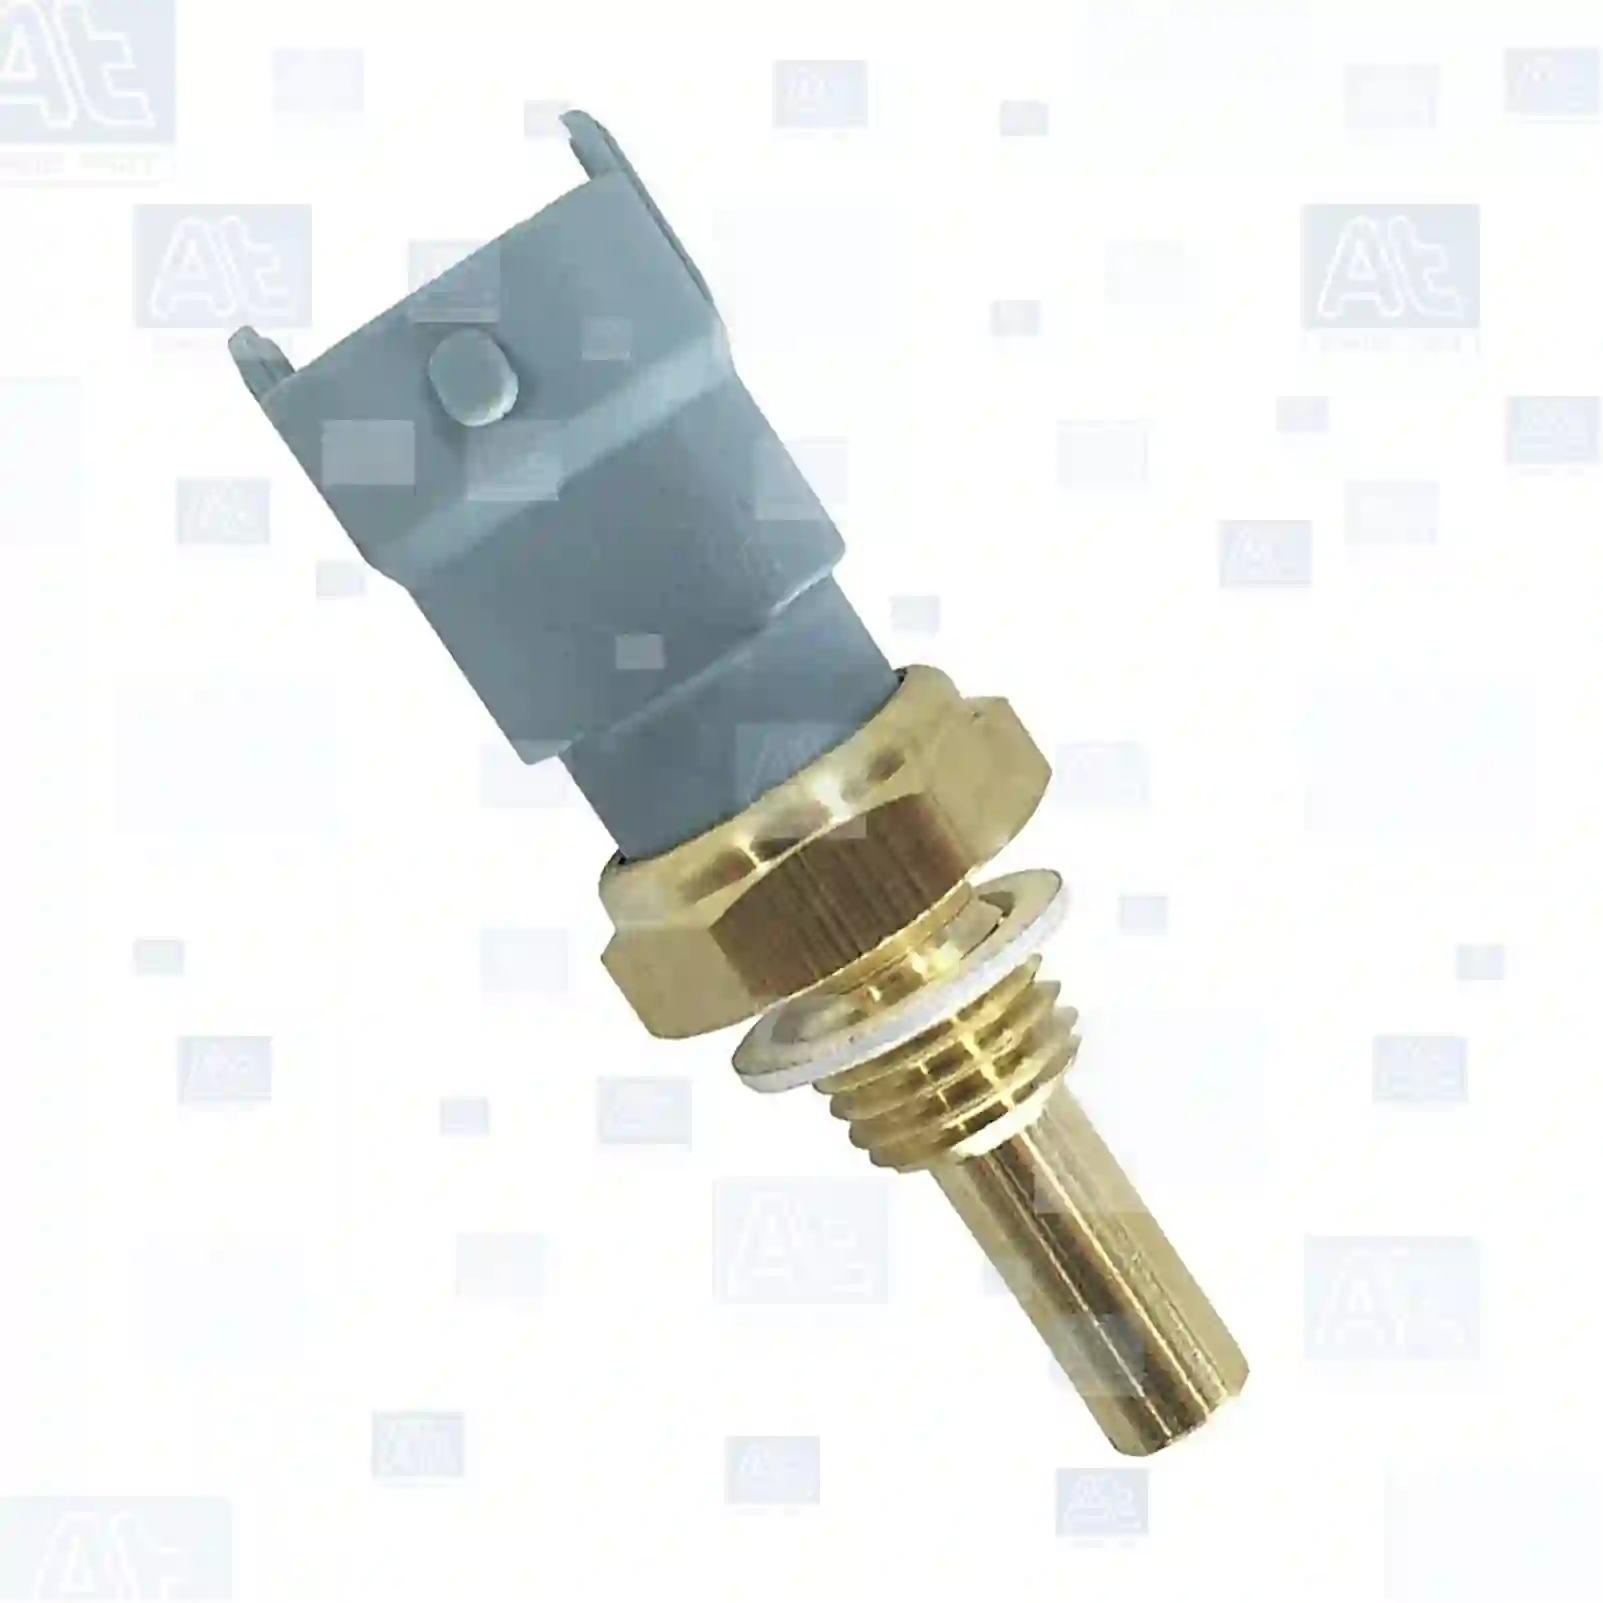 Temperature sensor, at no 77711383, oem no: 46462179, 46469865, 46472179, 500382599, 55187822, 60814175, 60814715, 71739856, 71741090, 99455420, 27712011, 360216055D, 3Z0963535, 12566778, 500382599, 82017881, 12566778, 12639899, 15393755, 24436779, 25183414, 55566146, 90541520, 90541937, 90542063, 90570185, 90570382, 91298691, 9193163, 9198691, 93174208, 93342219, 96868950, 97227219, 45962053F, 5066779AA, 00001338C7, 1338C7, 1338F9, 5010412450, 612630060035, 46472179, 500382599, 60814715, 71739856, 99455420, 07762299, 46462179, 46469865, 46472179, 500382599, 55187822, 60814175, 60814715, 71738956, 71739856, 71741090, 8972272190, 12566778, 12639899, 1338467, 1338511, 15336564, 15393755, 16240843, 25183414, 55566146, 55599958, 6235605, 6238179, 6238266, 6238422, 6238935, 6338486, 90490185, 90541520, 90541937, 90542063, 90570185, 90570382, 91298691, 9177213, 9193163, 9198691, 93174208, 93342219, 9542861, 9543406, 96868950, 97227219, 12628120, 90541937, 90541937, 37870-PLZ-D00, 37870-RBD-E01, 37870-RBD-E011, 37870-RDB-E01, 37870RBDE011M4, 8-97227219-0, 46469865, 46472179, 500382599, 5010412450, 60814715, 71739856, 5066779AA, 004510411110119088, 201149034, 04199809, 04213839, 46469865, 46472179, 500382599, 55187822, 60814175, 60814715, 71739856, 71741090, 99455420, 80891090, 03090C0071N, 961200690034, 82017881, 1338179, 1338357, 1338461, 1338467, 1338511, 1342567, 4660585, 4772307, 4773586, 4801922, 4818227, 6235605, 6238179, 6238266, 6238486, 6238935, 6338486, 00001338C7, 1338C7, 1338F9, 5001848546, 5010412450, 7020513340, 7420513340, 7421531072, 7485137860, 3Z0963535, PB107265PA, 12566778, 12639899, 15393755, 15398755, 24436779, 4660585, 4772208, 4772307, 4773586, 5341391, 55566146, 5959283, 90541937, 90542063, 90570185, 9177213, 9198691, 9542861, 9543406, 270990430, 90541937, 13650-78J00, 13650-78J00-000, 500382599, 20513340, 20153340, 20513340, 21531072, 93342220, 2R0919501B, 148661913003, 52767791110, ZG21107-0008 At Spare Part | Engine, Accelerator Pedal, Camshaft, Connecting Rod, Crankcase, Crankshaft, Cylinder Head, Engine Suspension Mountings, Exhaust Manifold, Exhaust Gas Recirculation, Filter Kits, Flywheel Housing, General Overhaul Kits, Engine, Intake Manifold, Oil Cleaner, Oil Cooler, Oil Filter, Oil Pump, Oil Sump, Piston & Liner, Sensor & Switch, Timing Case, Turbocharger, Cooling System, Belt Tensioner, Coolant Filter, Coolant Pipe, Corrosion Prevention Agent, Drive, Expansion Tank, Fan, Intercooler, Monitors & Gauges, Radiator, Thermostat, V-Belt / Timing belt, Water Pump, Fuel System, Electronical Injector Unit, Feed Pump, Fuel Filter, cpl., Fuel Gauge Sender,  Fuel Line, Fuel Pump, Fuel Tank, Injection Line Kit, Injection Pump, Exhaust System, Clutch & Pedal, Gearbox, Propeller Shaft, Axles, Brake System, Hubs & Wheels, Suspension, Leaf Spring, Universal Parts / Accessories, Steering, Electrical System, Cabin Temperature sensor, at no 77711383, oem no: 46462179, 46469865, 46472179, 500382599, 55187822, 60814175, 60814715, 71739856, 71741090, 99455420, 27712011, 360216055D, 3Z0963535, 12566778, 500382599, 82017881, 12566778, 12639899, 15393755, 24436779, 25183414, 55566146, 90541520, 90541937, 90542063, 90570185, 90570382, 91298691, 9193163, 9198691, 93174208, 93342219, 96868950, 97227219, 45962053F, 5066779AA, 00001338C7, 1338C7, 1338F9, 5010412450, 612630060035, 46472179, 500382599, 60814715, 71739856, 99455420, 07762299, 46462179, 46469865, 46472179, 500382599, 55187822, 60814175, 60814715, 71738956, 71739856, 71741090, 8972272190, 12566778, 12639899, 1338467, 1338511, 15336564, 15393755, 16240843, 25183414, 55566146, 55599958, 6235605, 6238179, 6238266, 6238422, 6238935, 6338486, 90490185, 90541520, 90541937, 90542063, 90570185, 90570382, 91298691, 9177213, 9193163, 9198691, 93174208, 93342219, 9542861, 9543406, 96868950, 97227219, 12628120, 90541937, 90541937, 37870-PLZ-D00, 37870-RBD-E01, 37870-RBD-E011, 37870-RDB-E01, 37870RBDE011M4, 8-97227219-0, 46469865, 46472179, 500382599, 5010412450, 60814715, 71739856, 5066779AA, 004510411110119088, 201149034, 04199809, 04213839, 46469865, 46472179, 500382599, 55187822, 60814175, 60814715, 71739856, 71741090, 99455420, 80891090, 03090C0071N, 961200690034, 82017881, 1338179, 1338357, 1338461, 1338467, 1338511, 1342567, 4660585, 4772307, 4773586, 4801922, 4818227, 6235605, 6238179, 6238266, 6238486, 6238935, 6338486, 00001338C7, 1338C7, 1338F9, 5001848546, 5010412450, 7020513340, 7420513340, 7421531072, 7485137860, 3Z0963535, PB107265PA, 12566778, 12639899, 15393755, 15398755, 24436779, 4660585, 4772208, 4772307, 4773586, 5341391, 55566146, 5959283, 90541937, 90542063, 90570185, 9177213, 9198691, 9542861, 9543406, 270990430, 90541937, 13650-78J00, 13650-78J00-000, 500382599, 20513340, 20153340, 20513340, 21531072, 93342220, 2R0919501B, 148661913003, 52767791110, ZG21107-0008 At Spare Part | Engine, Accelerator Pedal, Camshaft, Connecting Rod, Crankcase, Crankshaft, Cylinder Head, Engine Suspension Mountings, Exhaust Manifold, Exhaust Gas Recirculation, Filter Kits, Flywheel Housing, General Overhaul Kits, Engine, Intake Manifold, Oil Cleaner, Oil Cooler, Oil Filter, Oil Pump, Oil Sump, Piston & Liner, Sensor & Switch, Timing Case, Turbocharger, Cooling System, Belt Tensioner, Coolant Filter, Coolant Pipe, Corrosion Prevention Agent, Drive, Expansion Tank, Fan, Intercooler, Monitors & Gauges, Radiator, Thermostat, V-Belt / Timing belt, Water Pump, Fuel System, Electronical Injector Unit, Feed Pump, Fuel Filter, cpl., Fuel Gauge Sender,  Fuel Line, Fuel Pump, Fuel Tank, Injection Line Kit, Injection Pump, Exhaust System, Clutch & Pedal, Gearbox, Propeller Shaft, Axles, Brake System, Hubs & Wheels, Suspension, Leaf Spring, Universal Parts / Accessories, Steering, Electrical System, Cabin